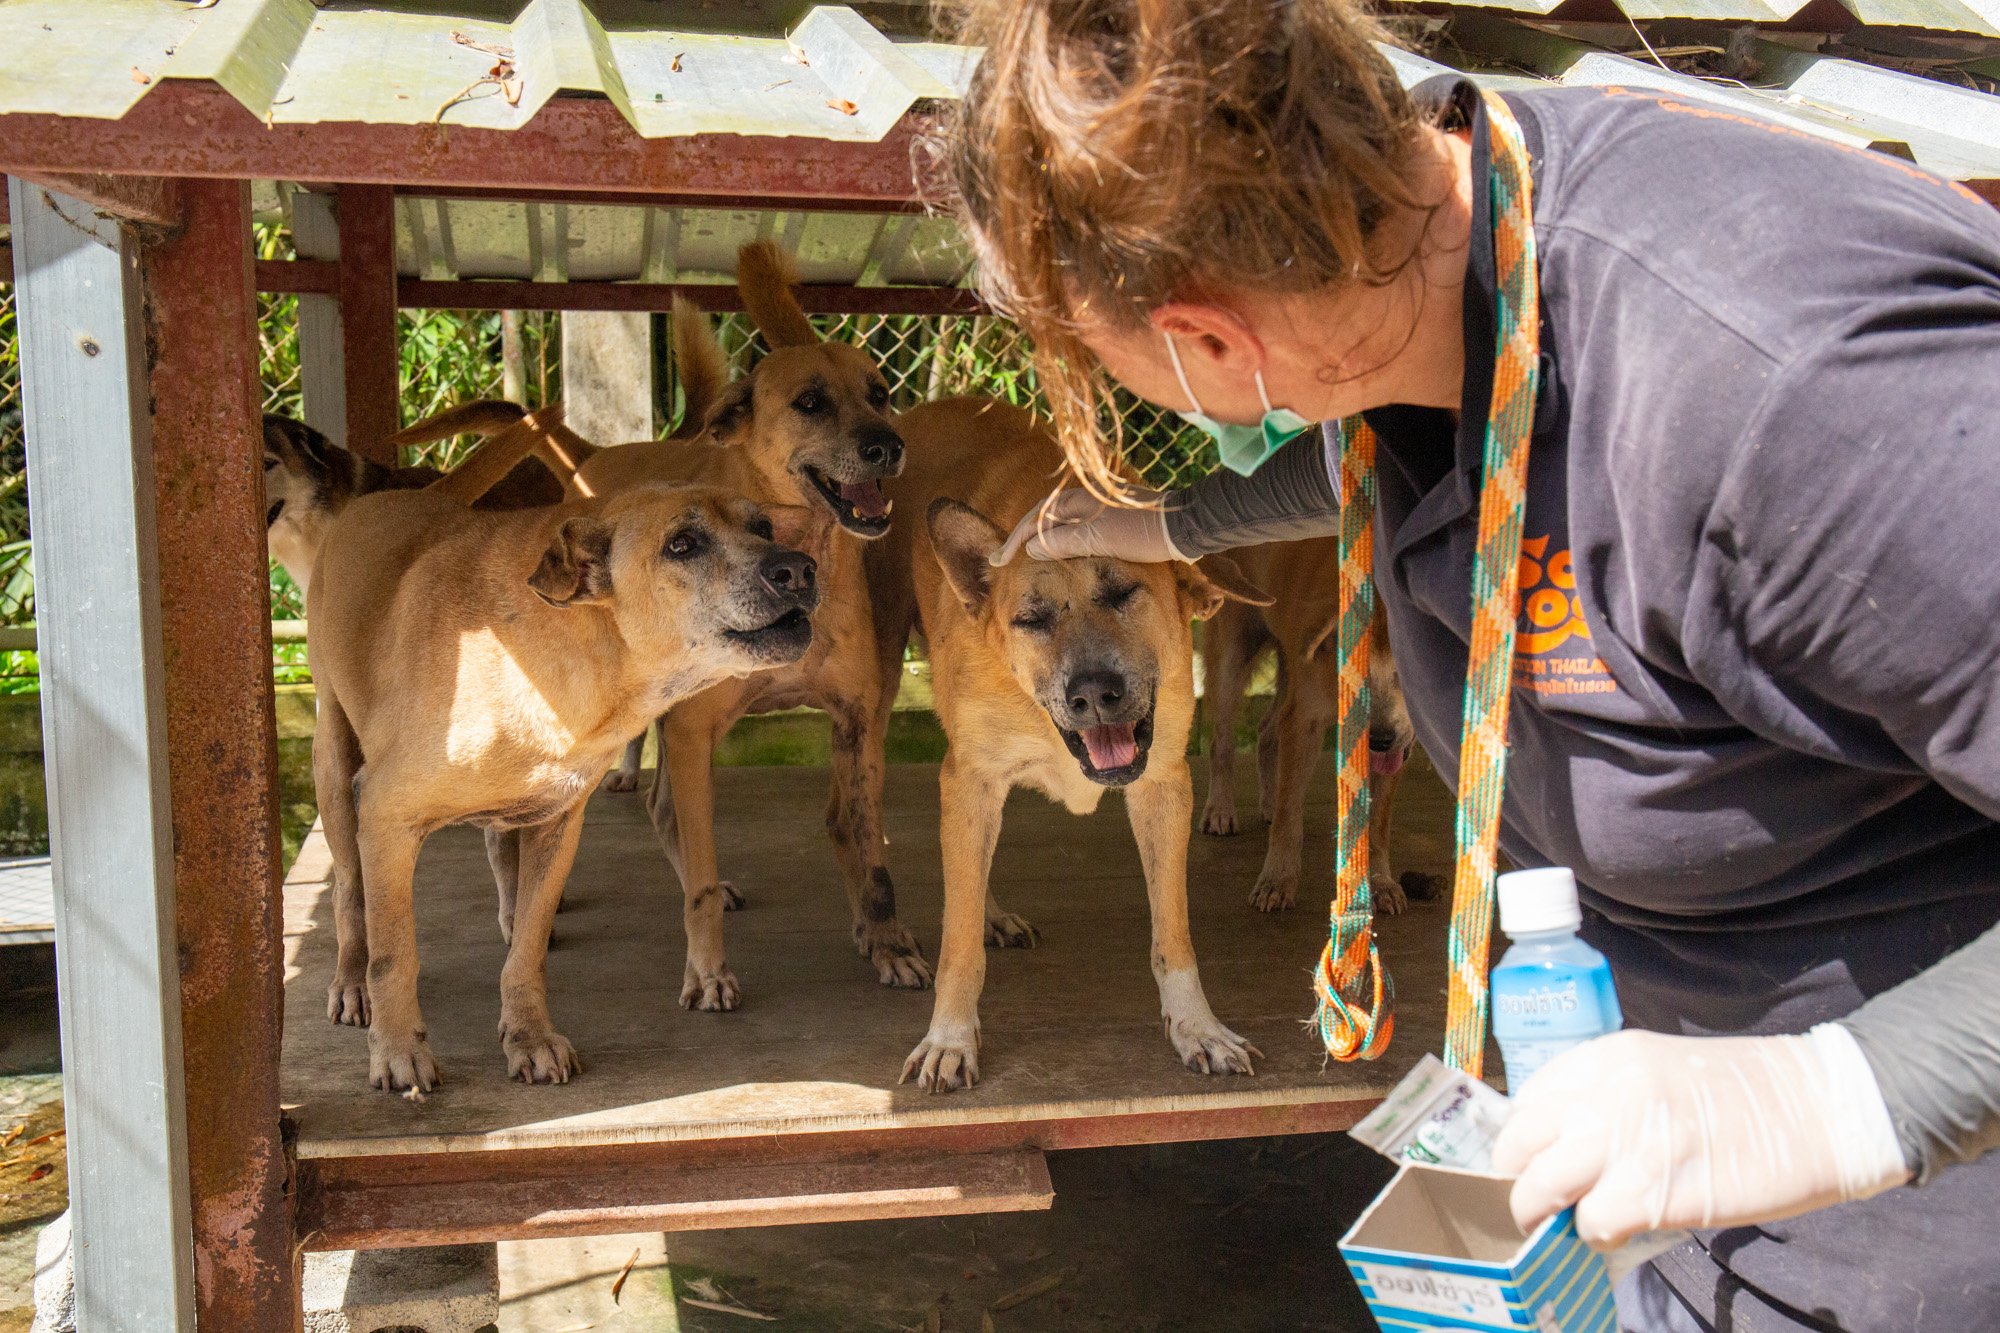 Regina Telbisz taking a moment to pet some of the dogs at the Phuket Dog Shelter. She is there to check on and treat other dogs.